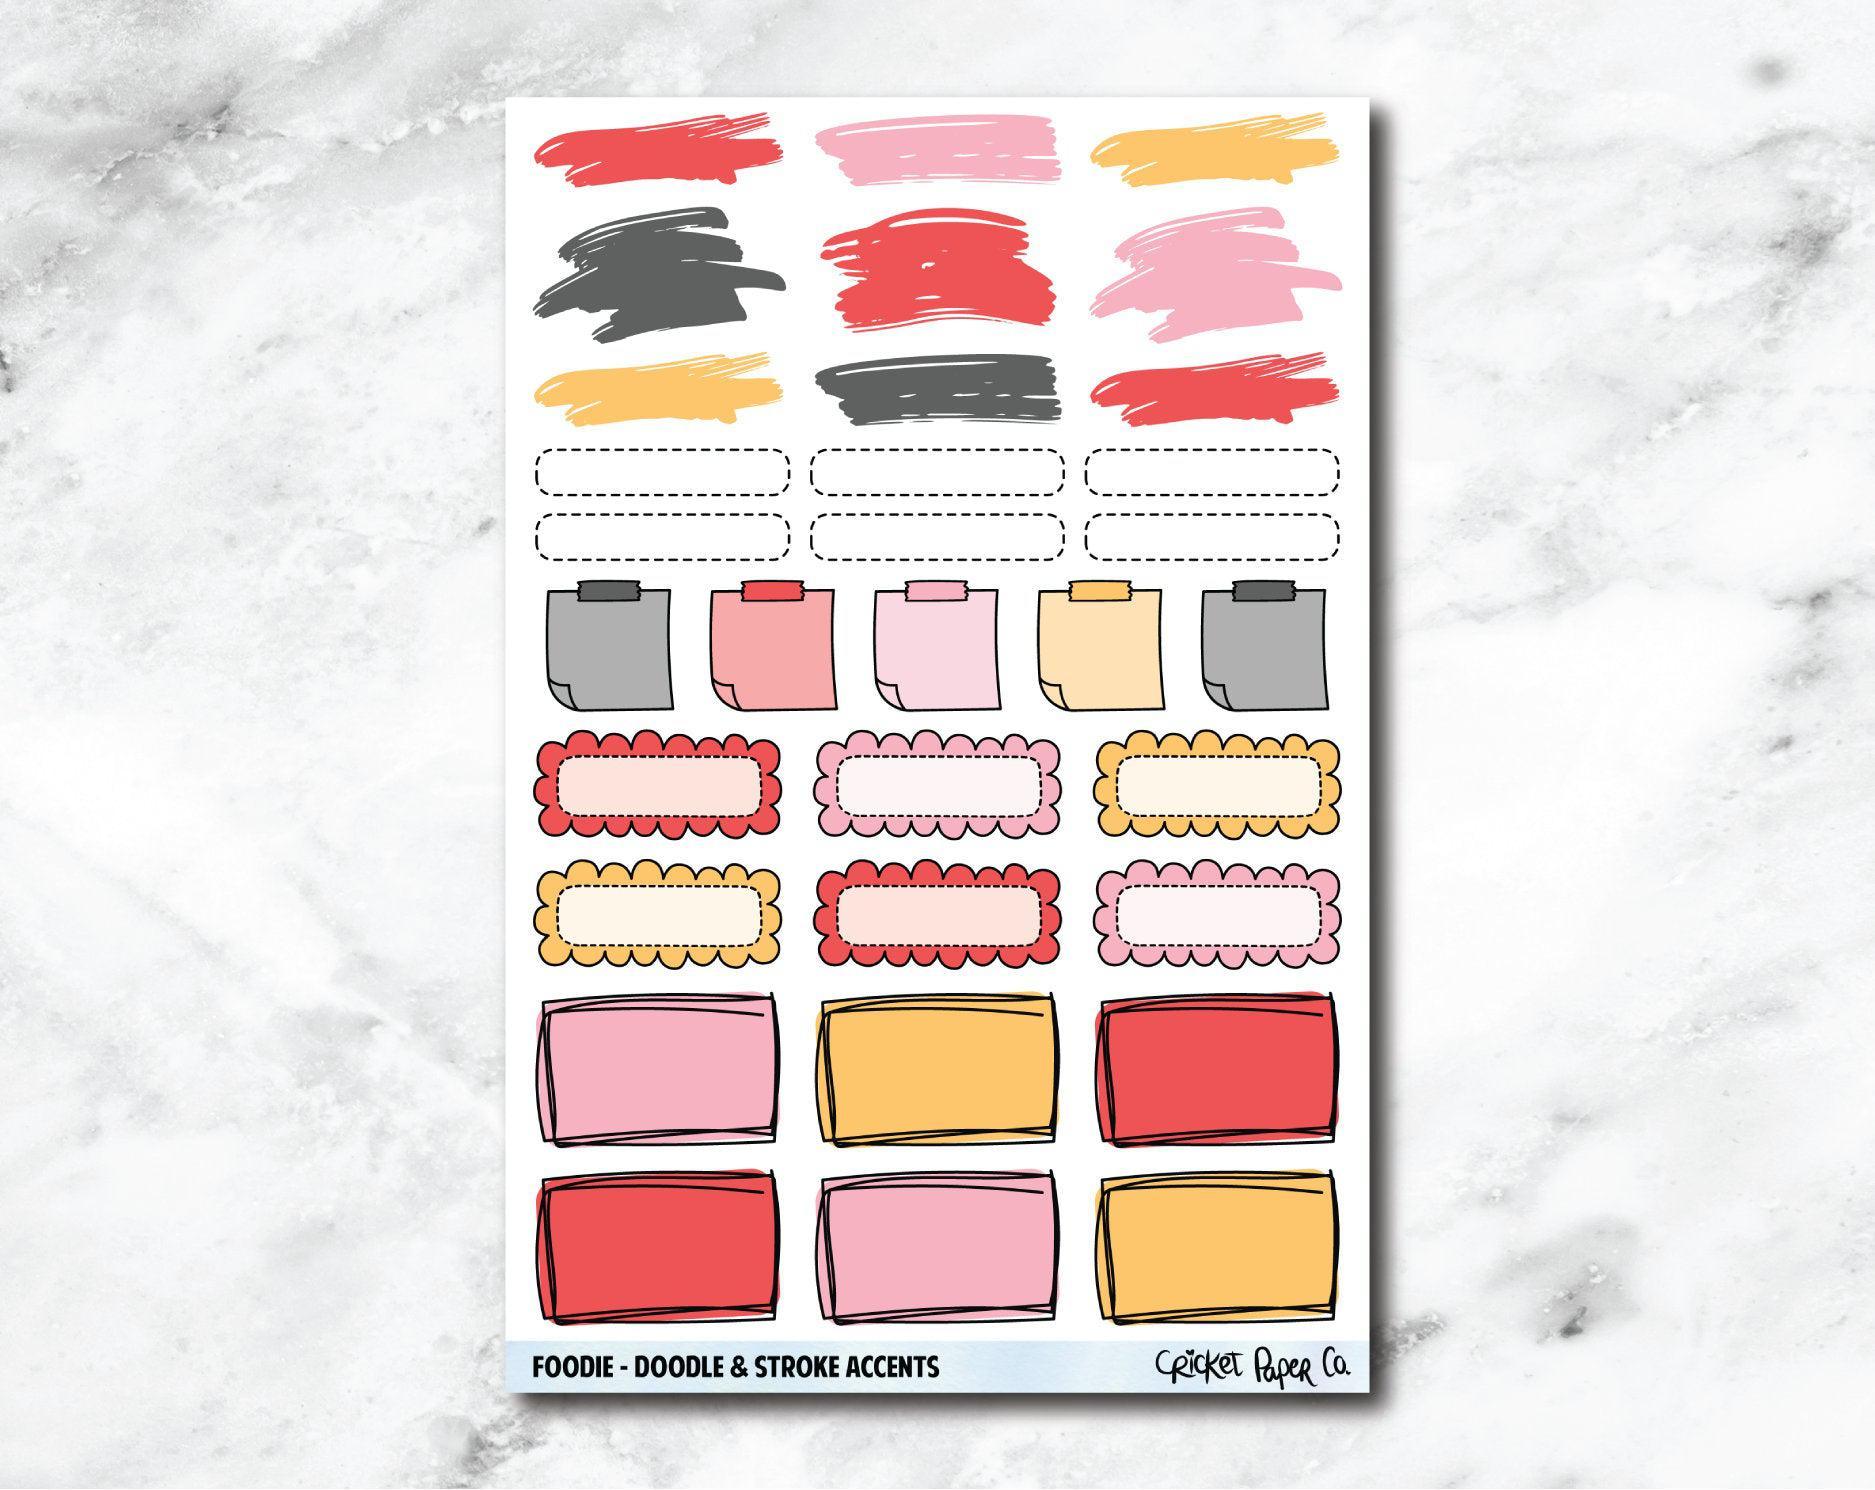 Doodle & Stroke Accents Planner Stickers - Foodie-Cricket Paper Co.